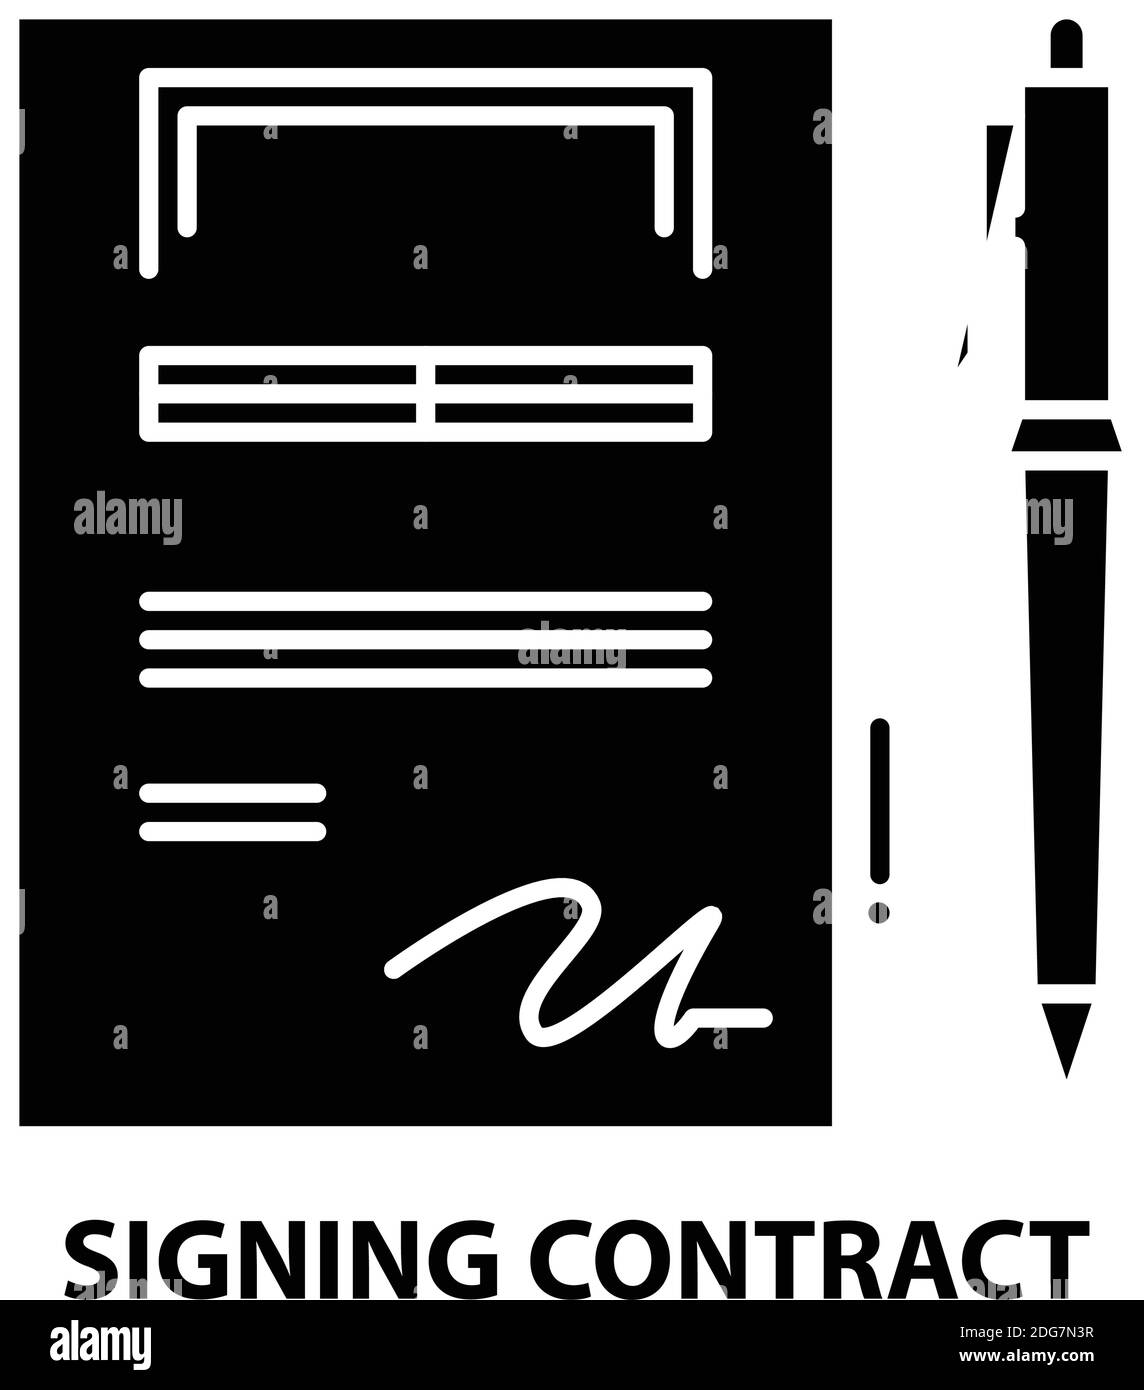 signing contract icon, black vector sign with editable strokes, concept illustration Stock Vector